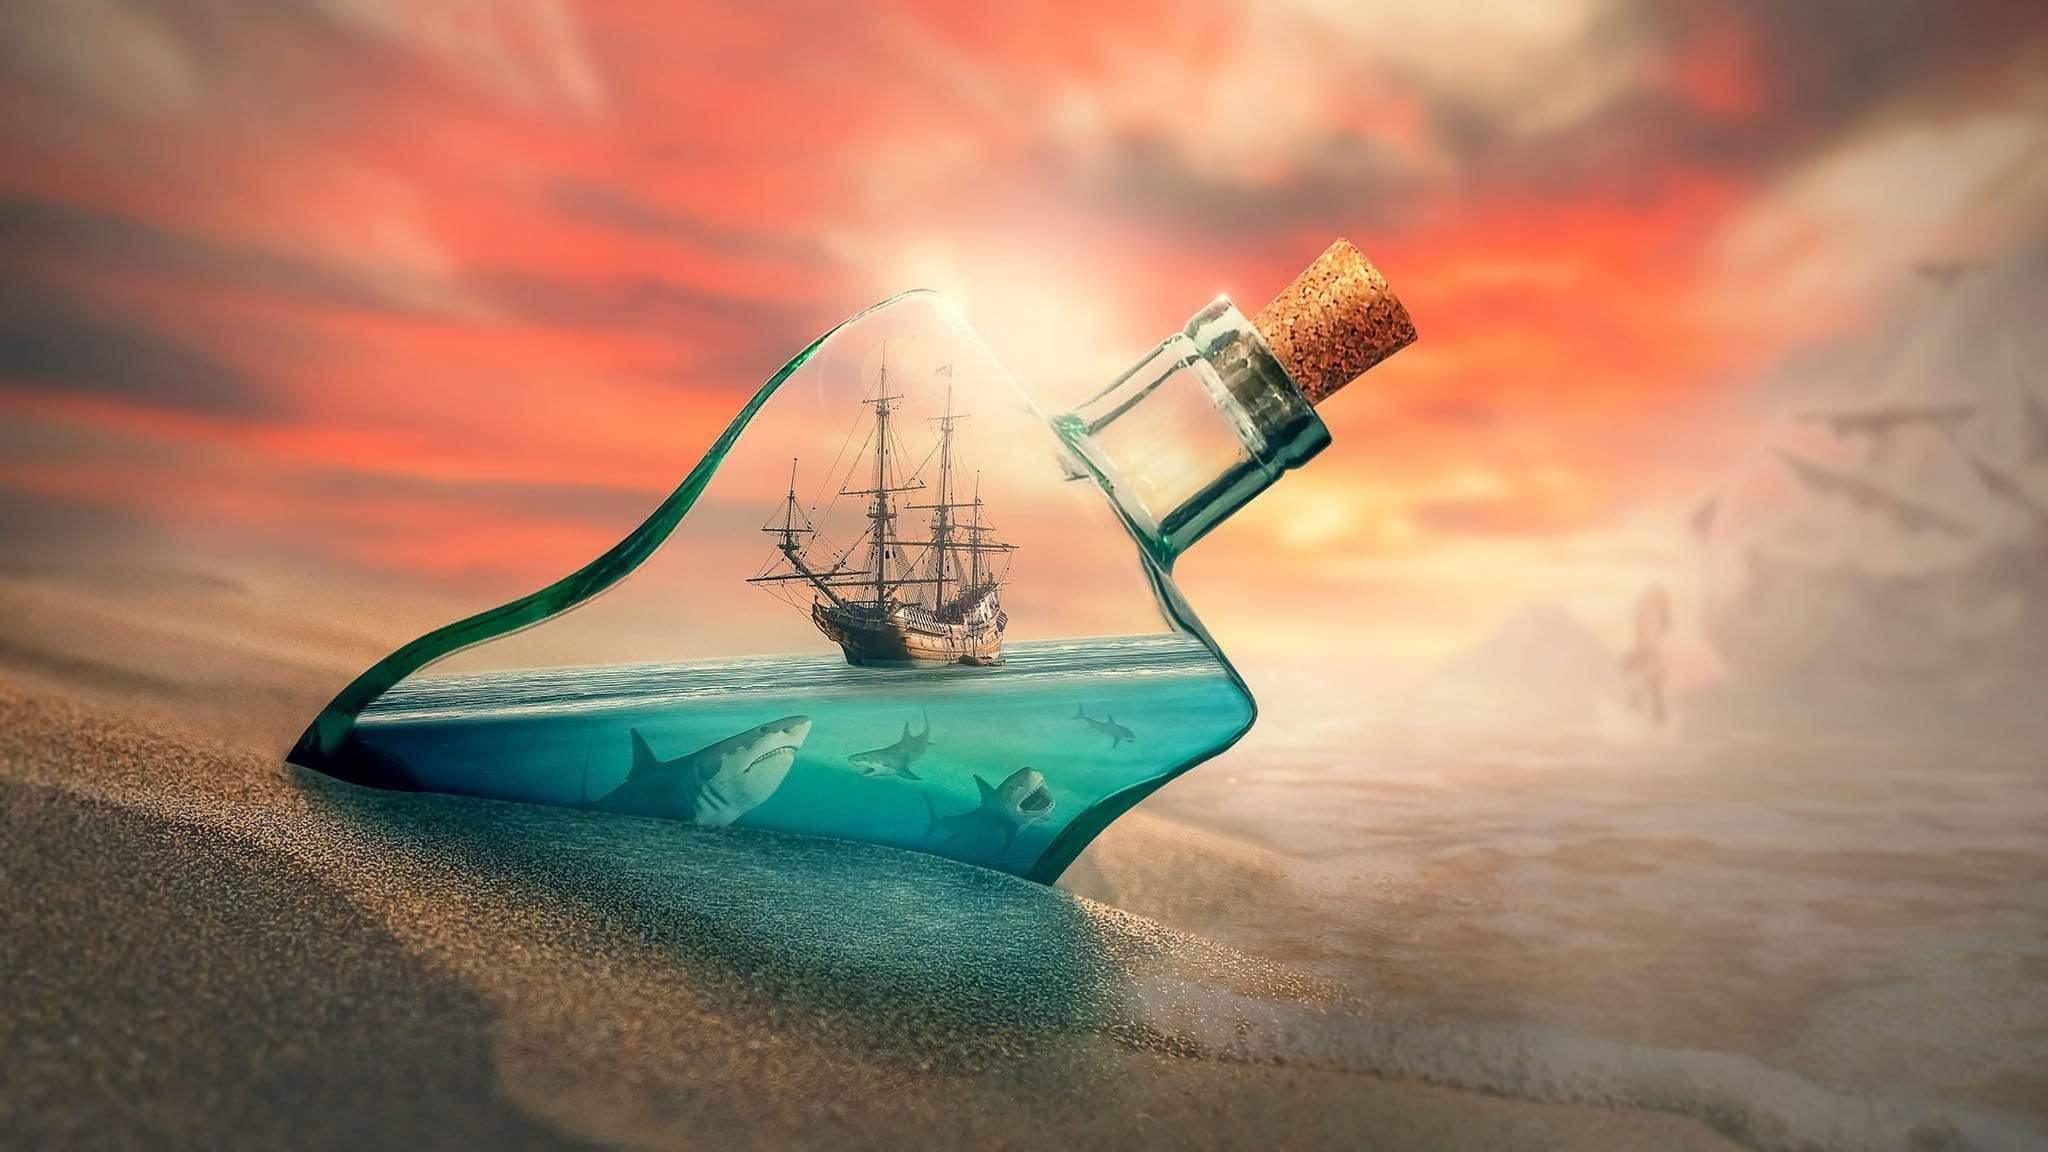 Beach with Ship Trapped in Bottle,  Wallpaper, Peel-N-Stick and Removes Easily Anytime